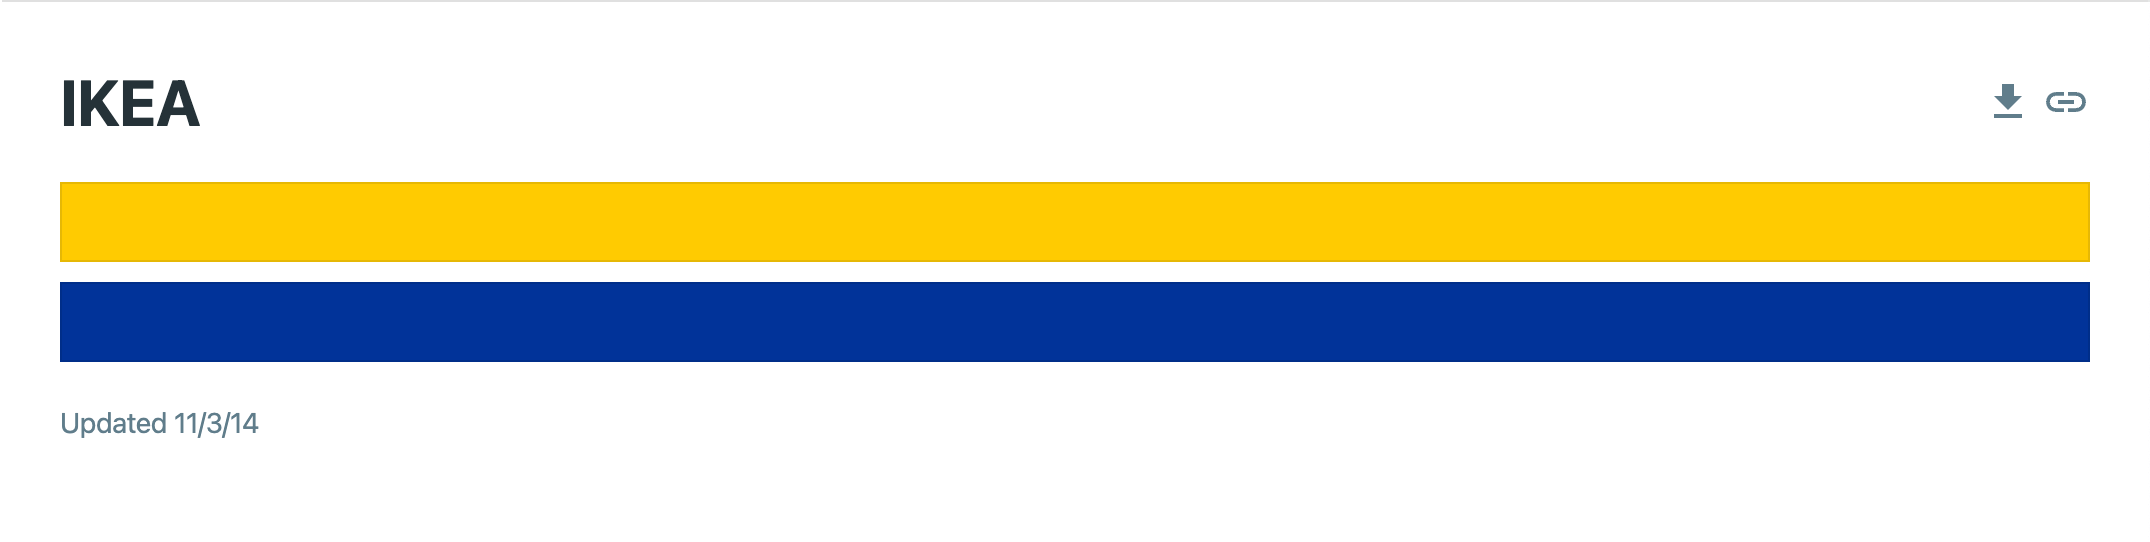 IKEA's brand colors (yellow and blue)